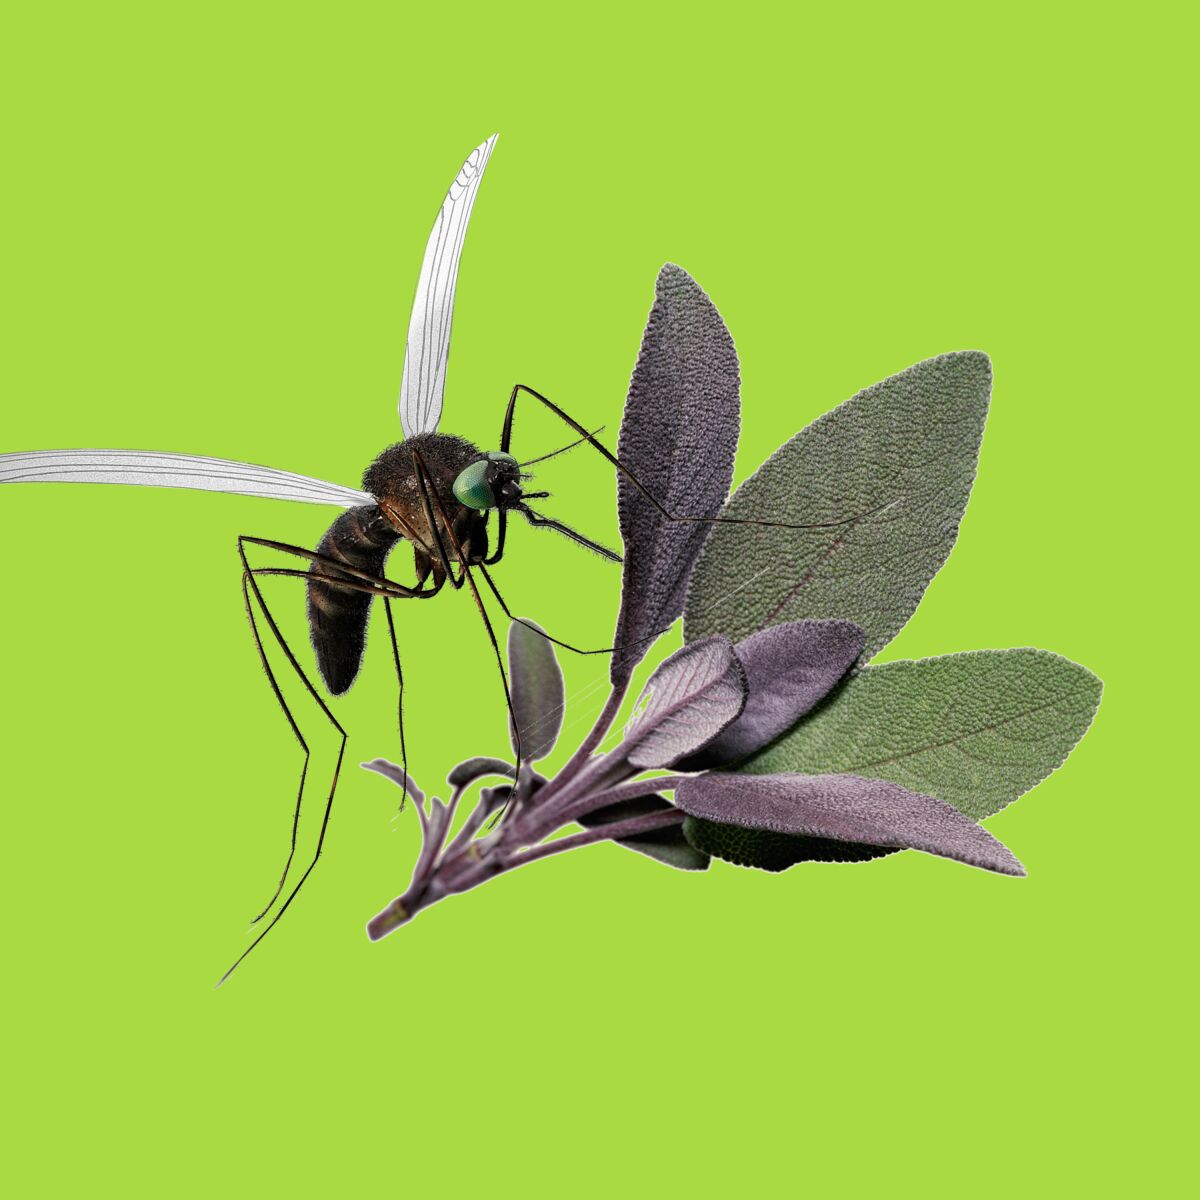 Mosquito with leaves on a green background.